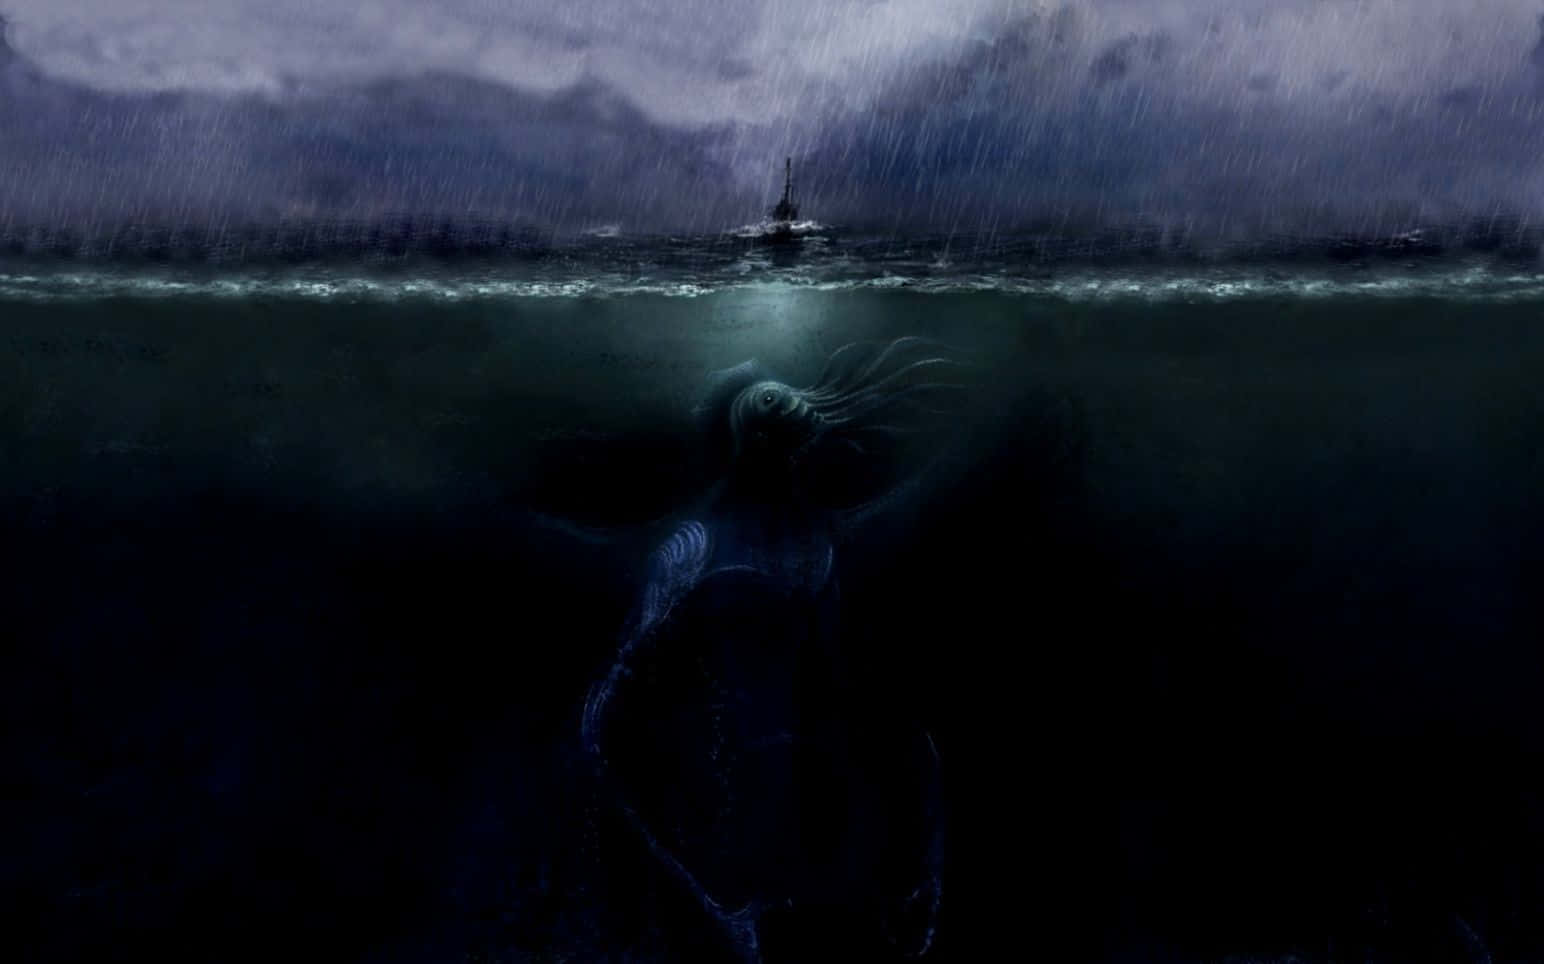 A Dark Painting Of A Woman In The Water